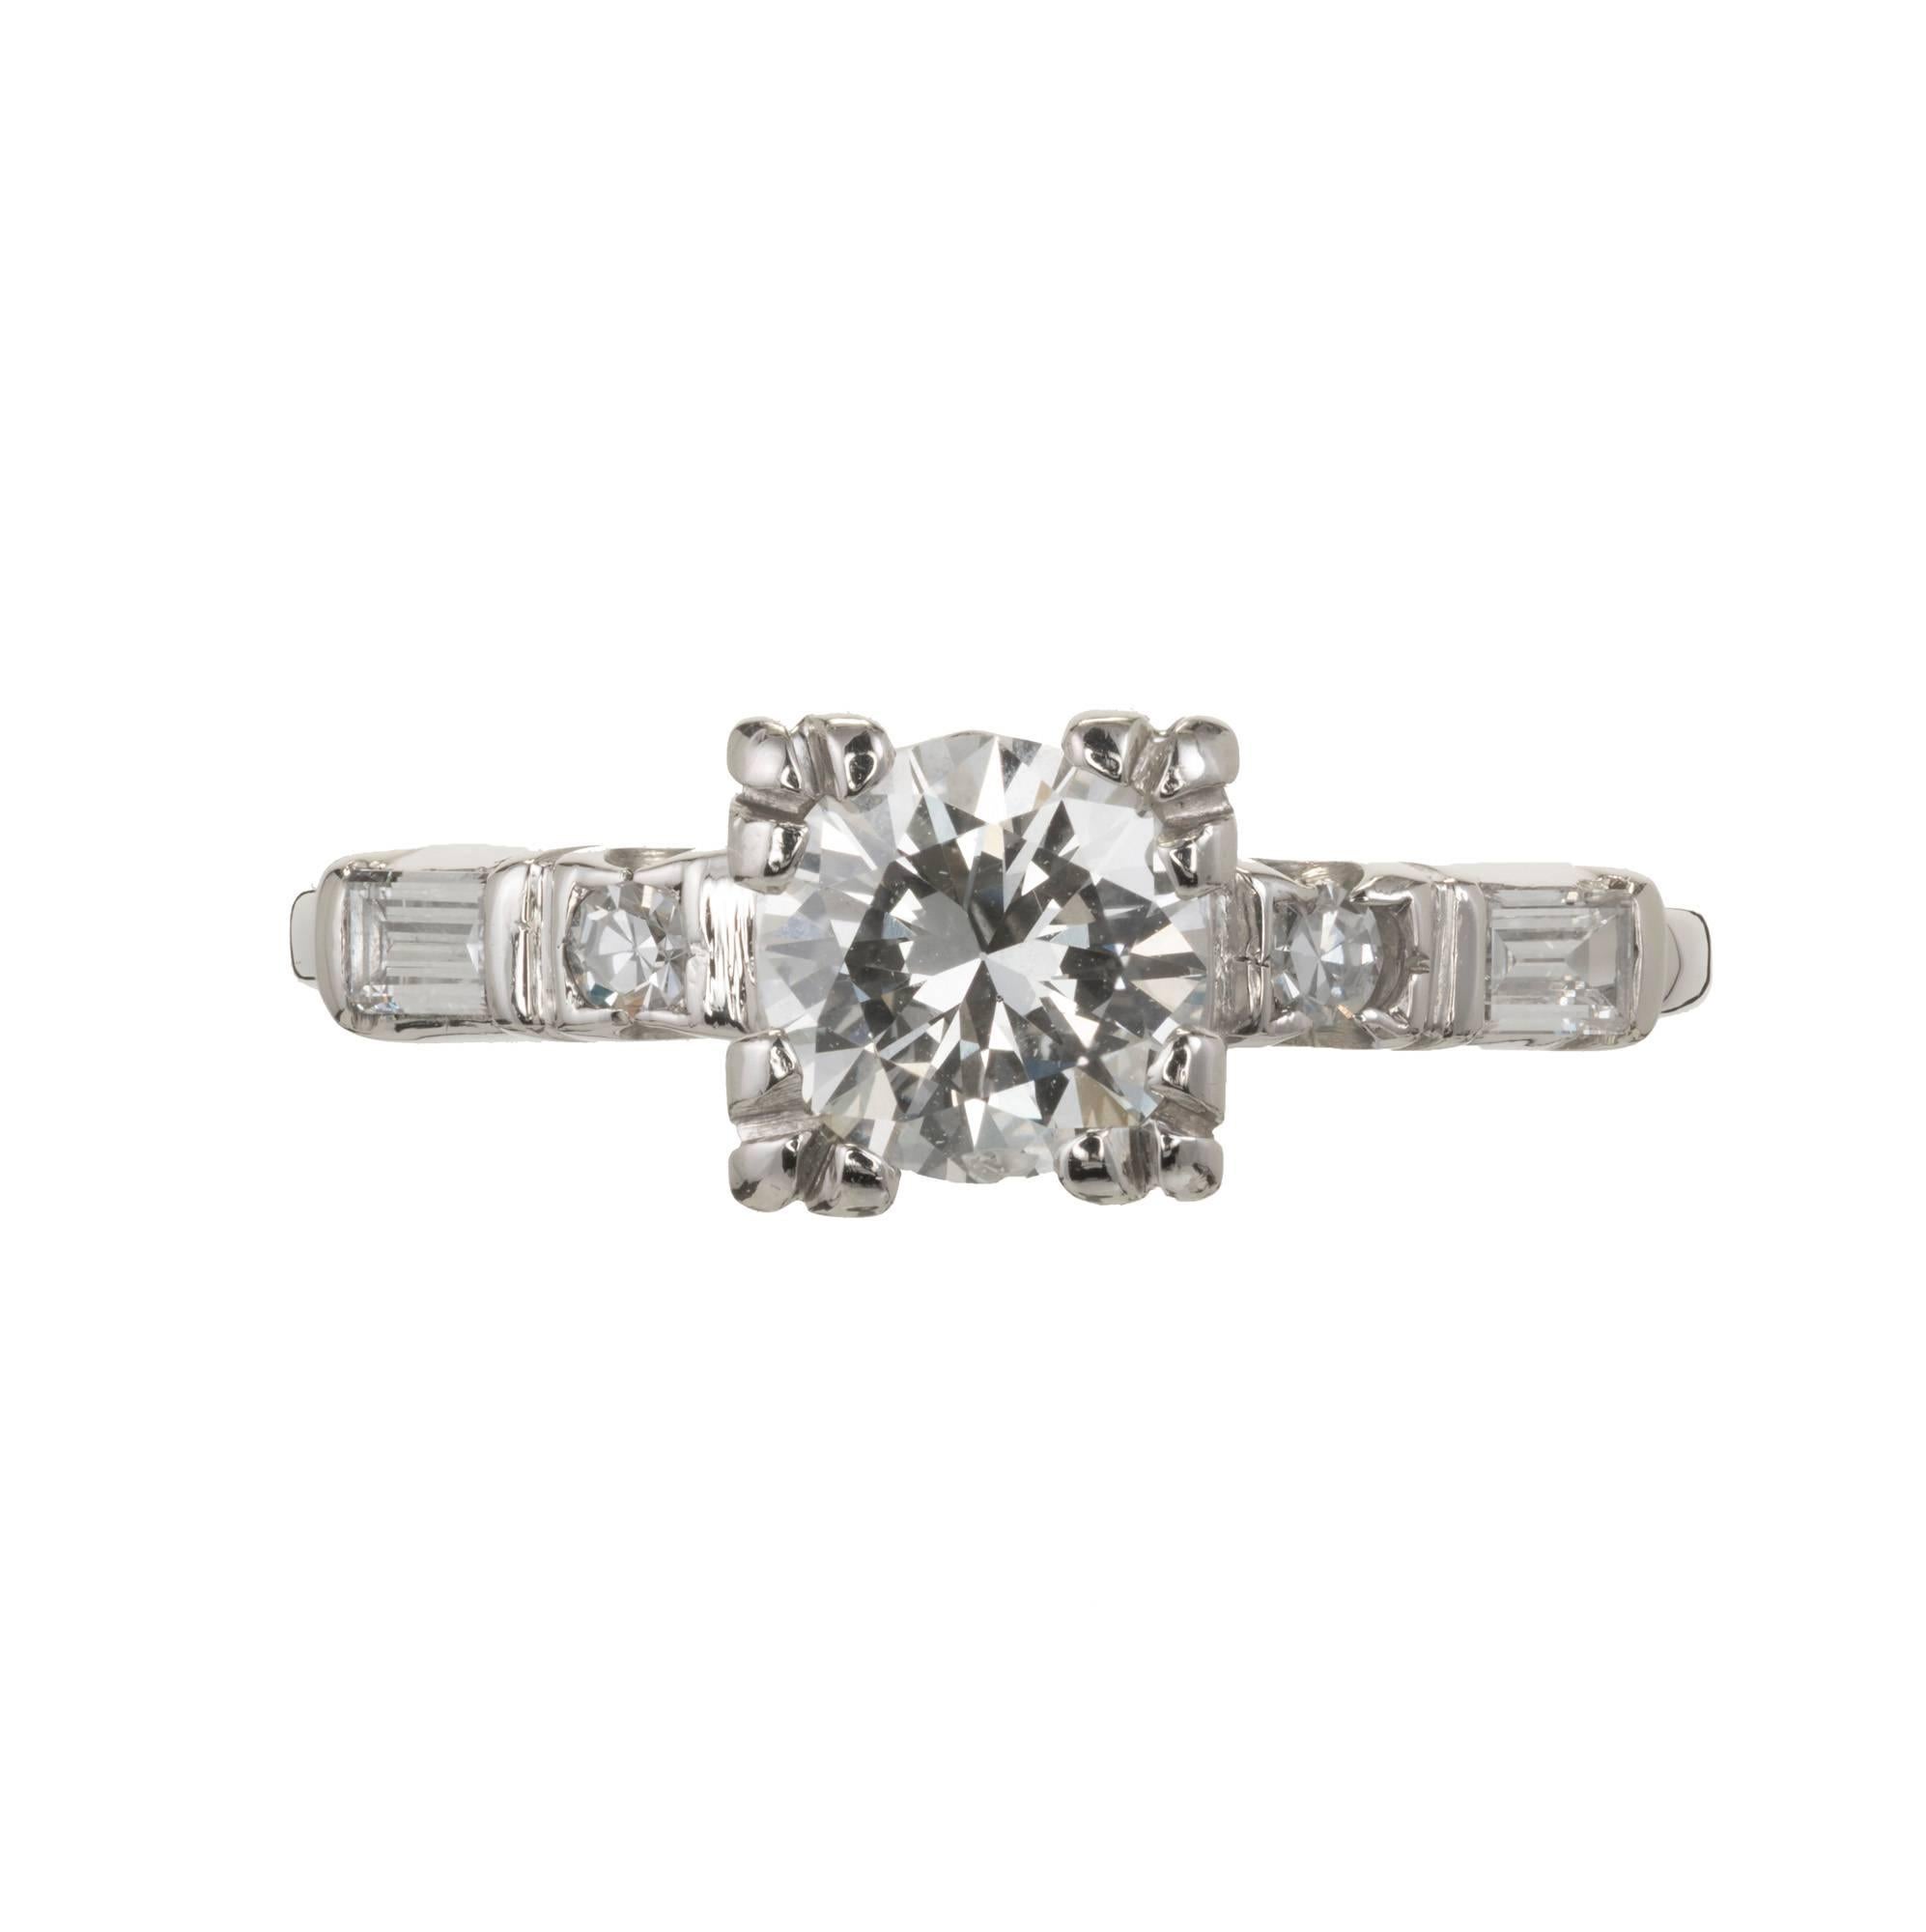 Vintage Platinum 1940s transitional cut Diamond engagement ring with baguette and round diamond accents. Square 1940’s style top with a round Diamond.

1 transitional cut Diamond, approx. total weight .75cts, G – H, SI2, EGL certificate #